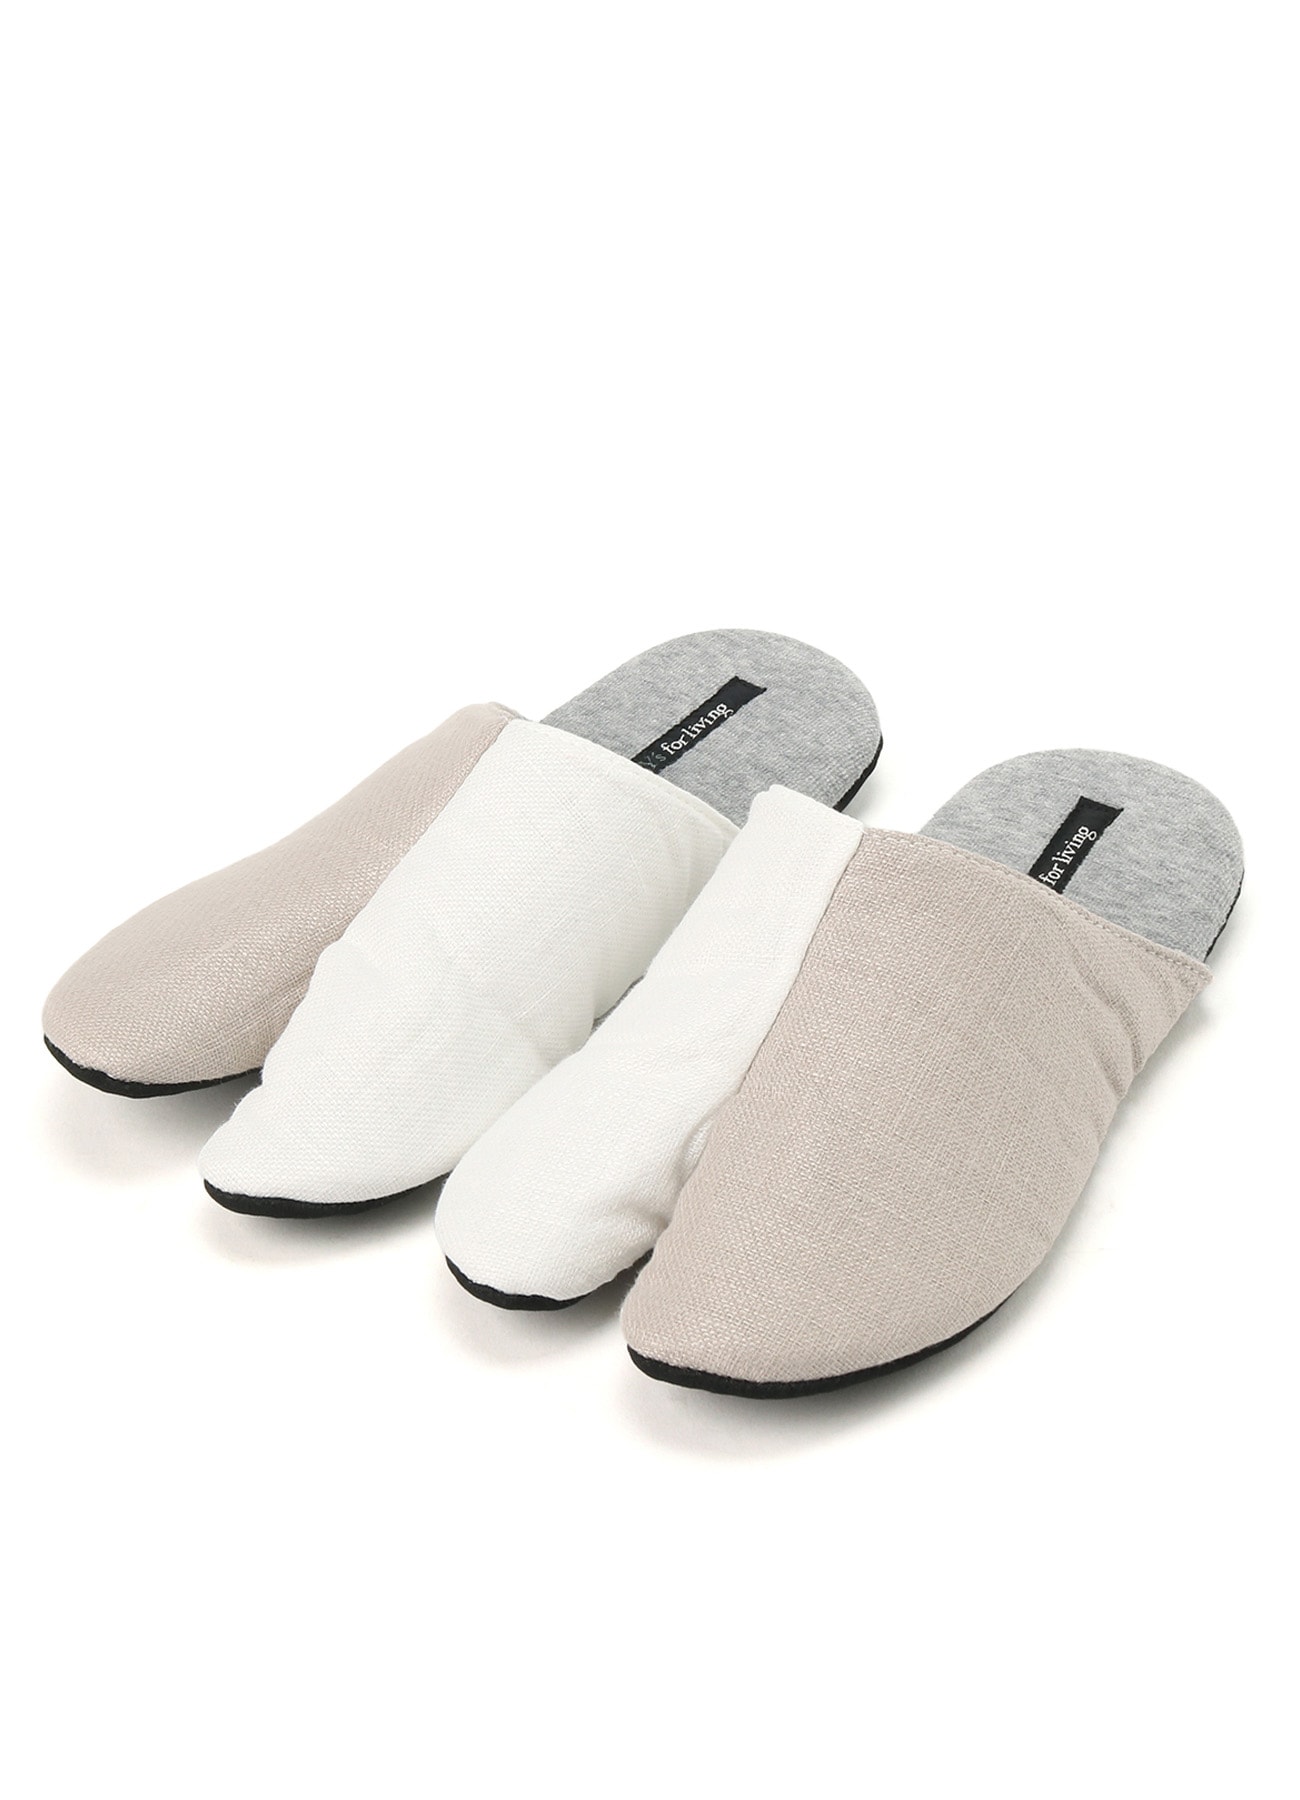 FRENCH LINEN DOBBY CLOTH TABI SLIPPERS (M)